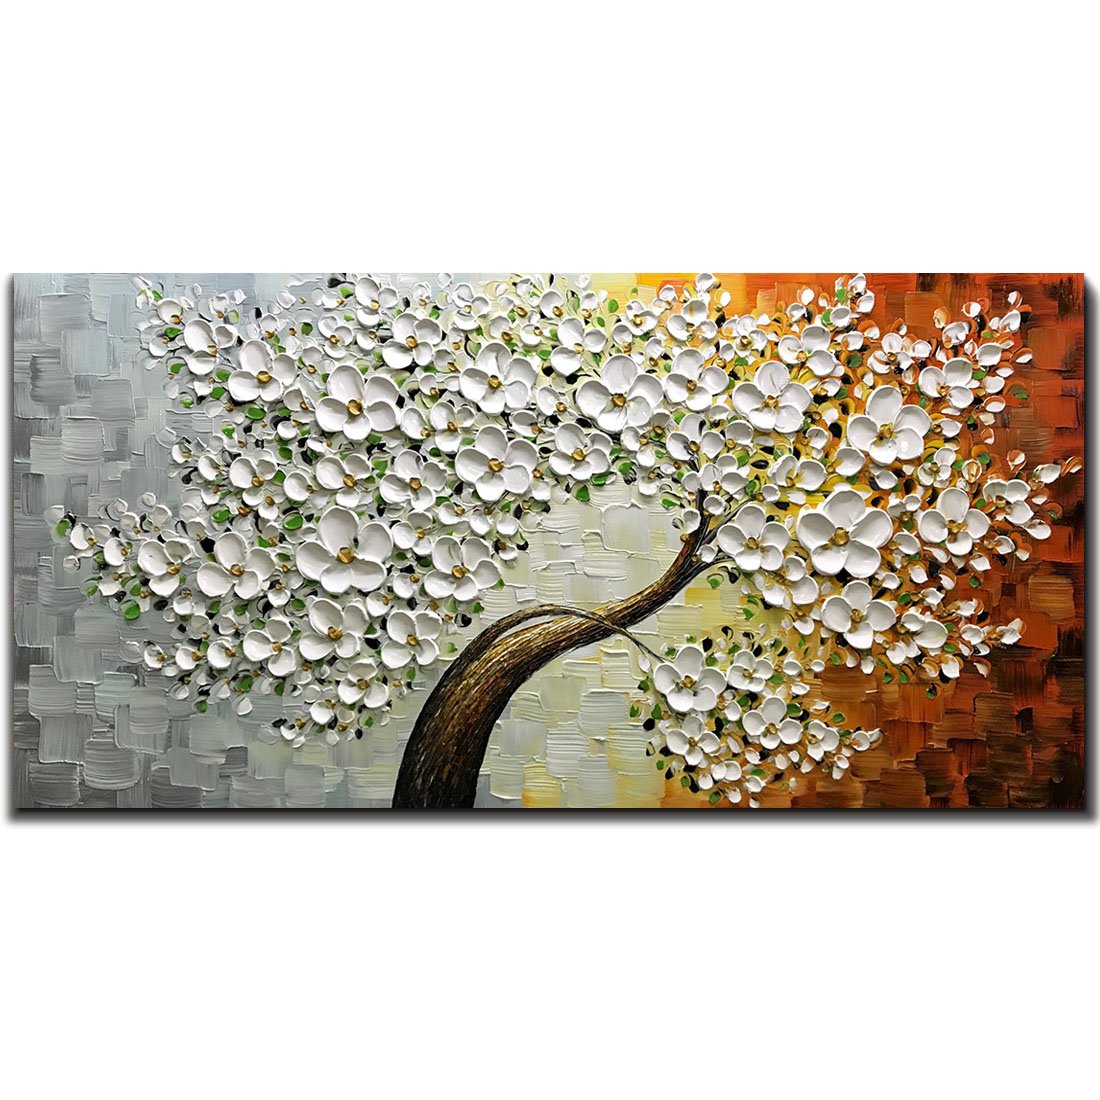 V-inspire Paintings, 24x48 Inch 3D Abstract Paintings White Maple Tree Oil Hand Painting On Canvas Wood Inside Framed Ready to Hang Wall Decoration...